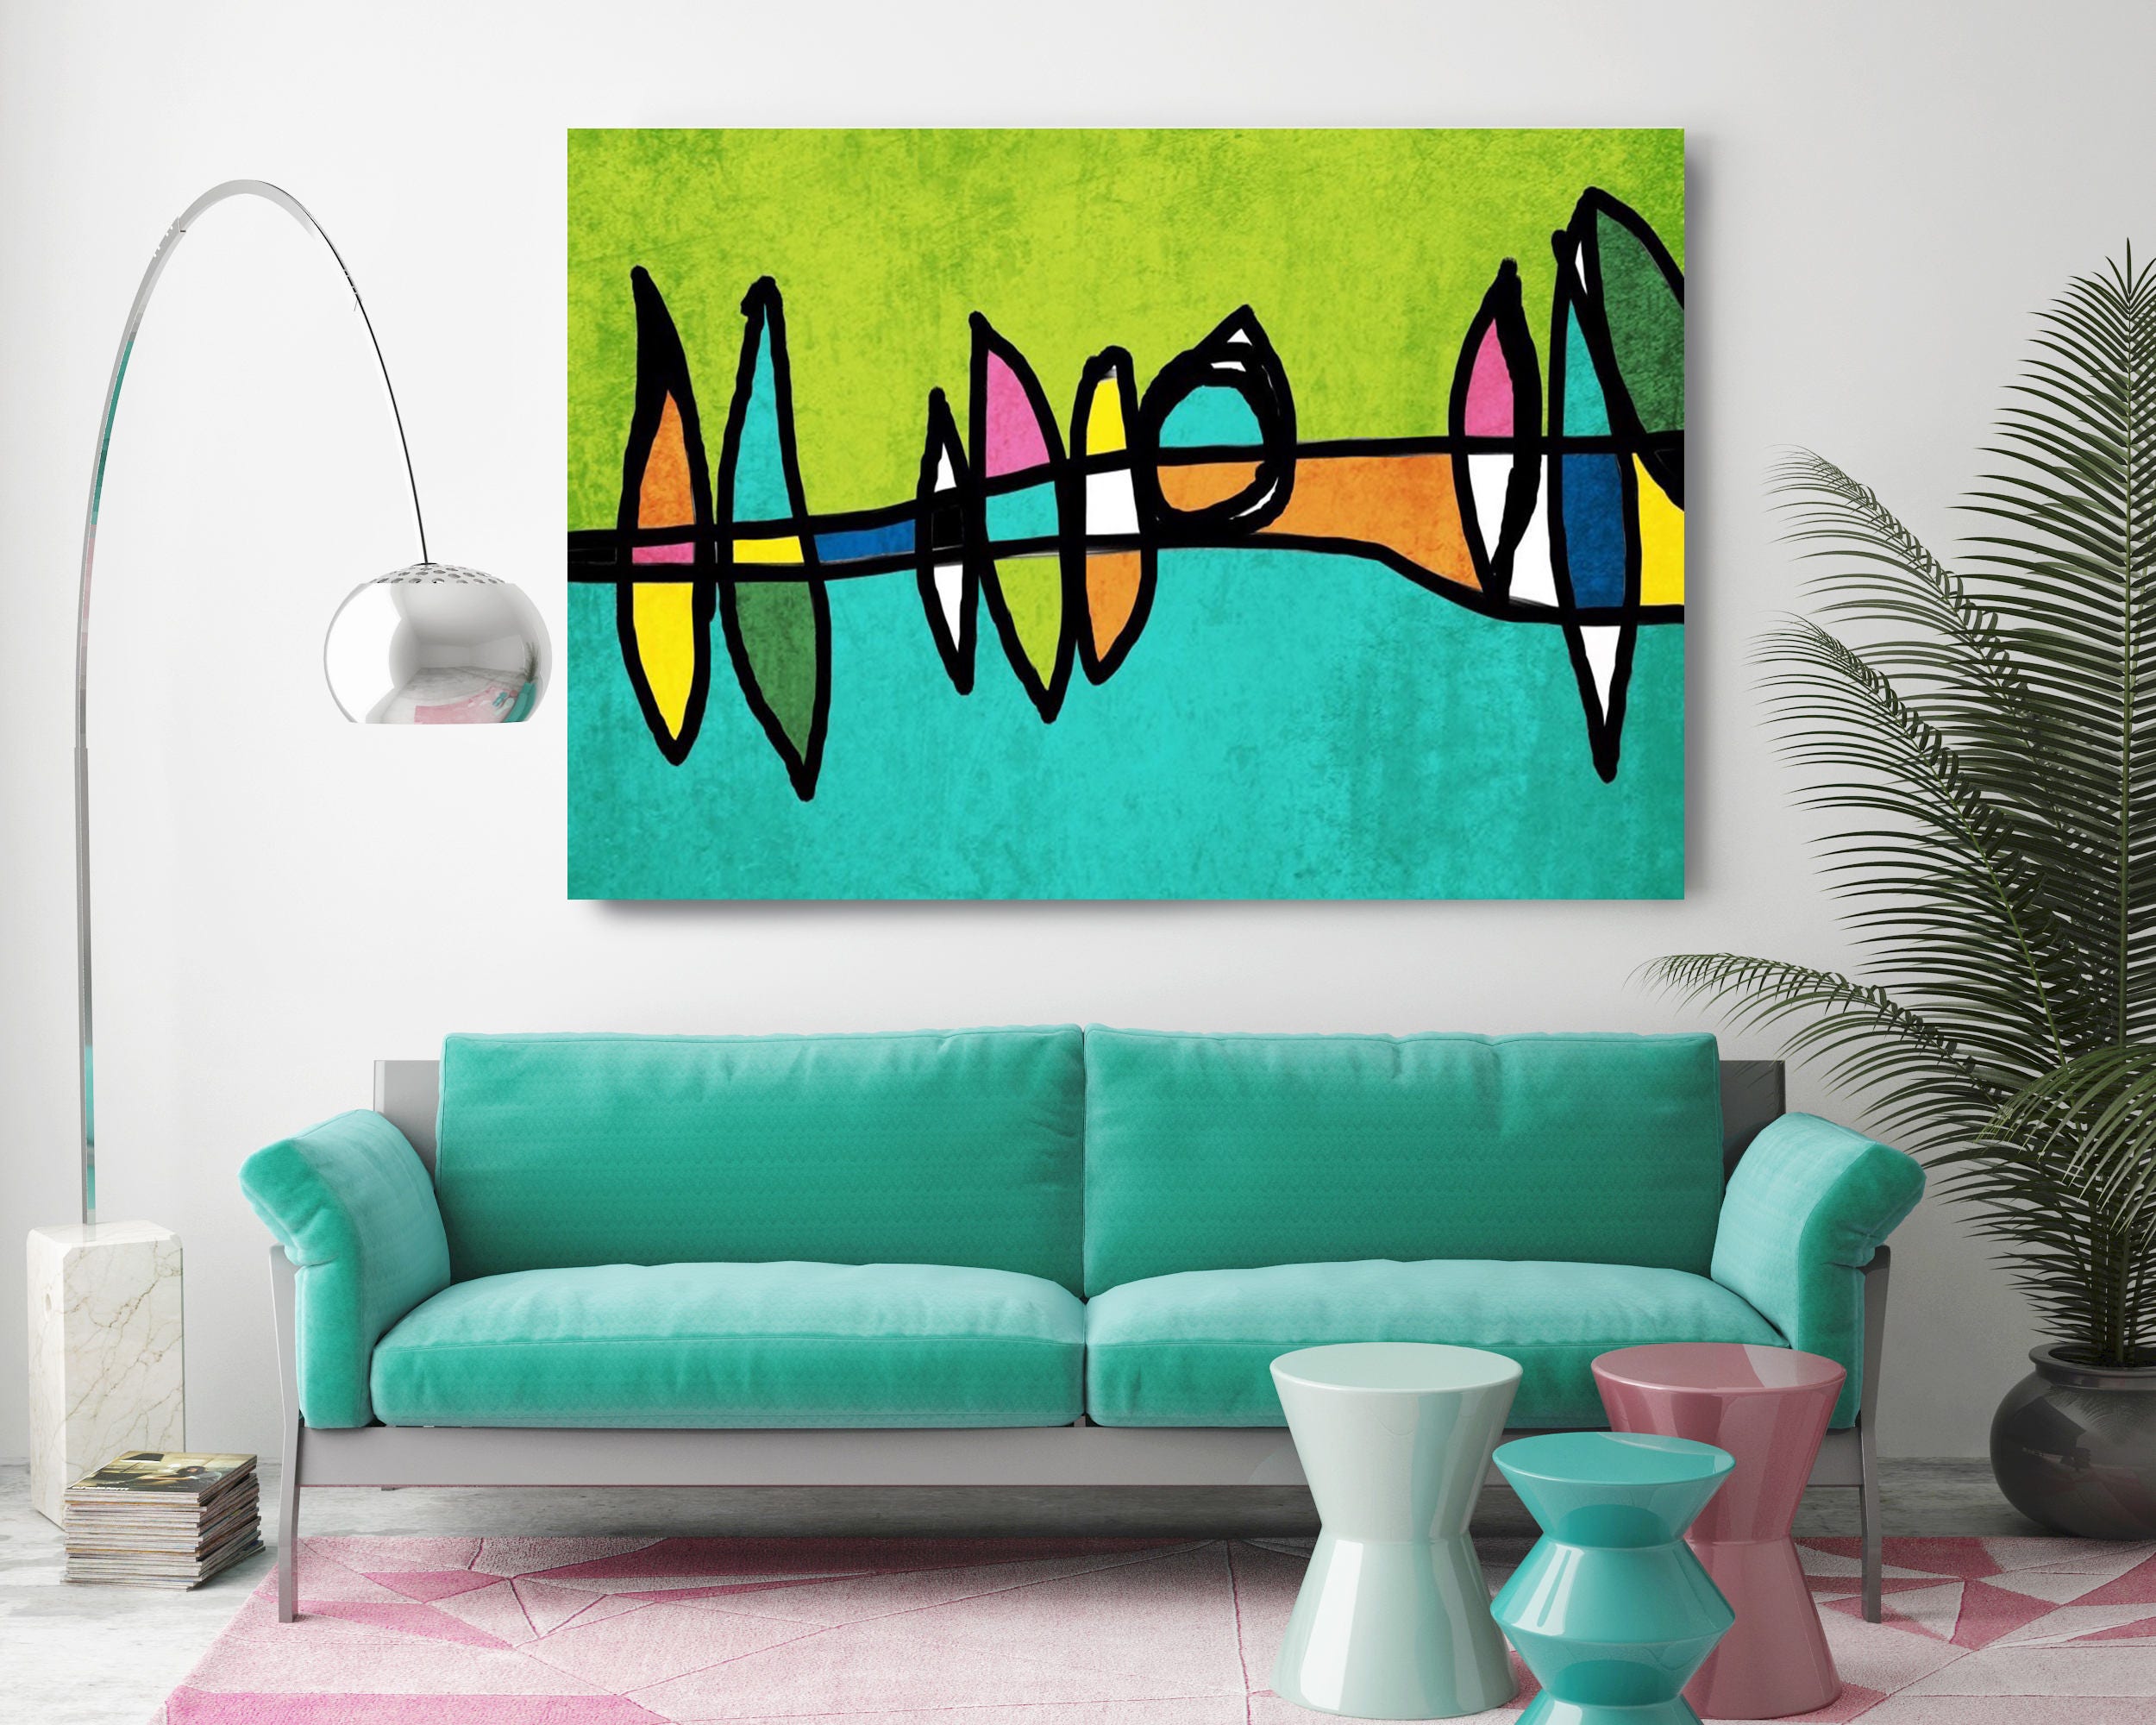 Mid Century Modern Retro Canvas Print Mid Century Wall Art Large Wall Art  in Teal and Green, Mid Century Wall Art, Mid Century Modern Decor